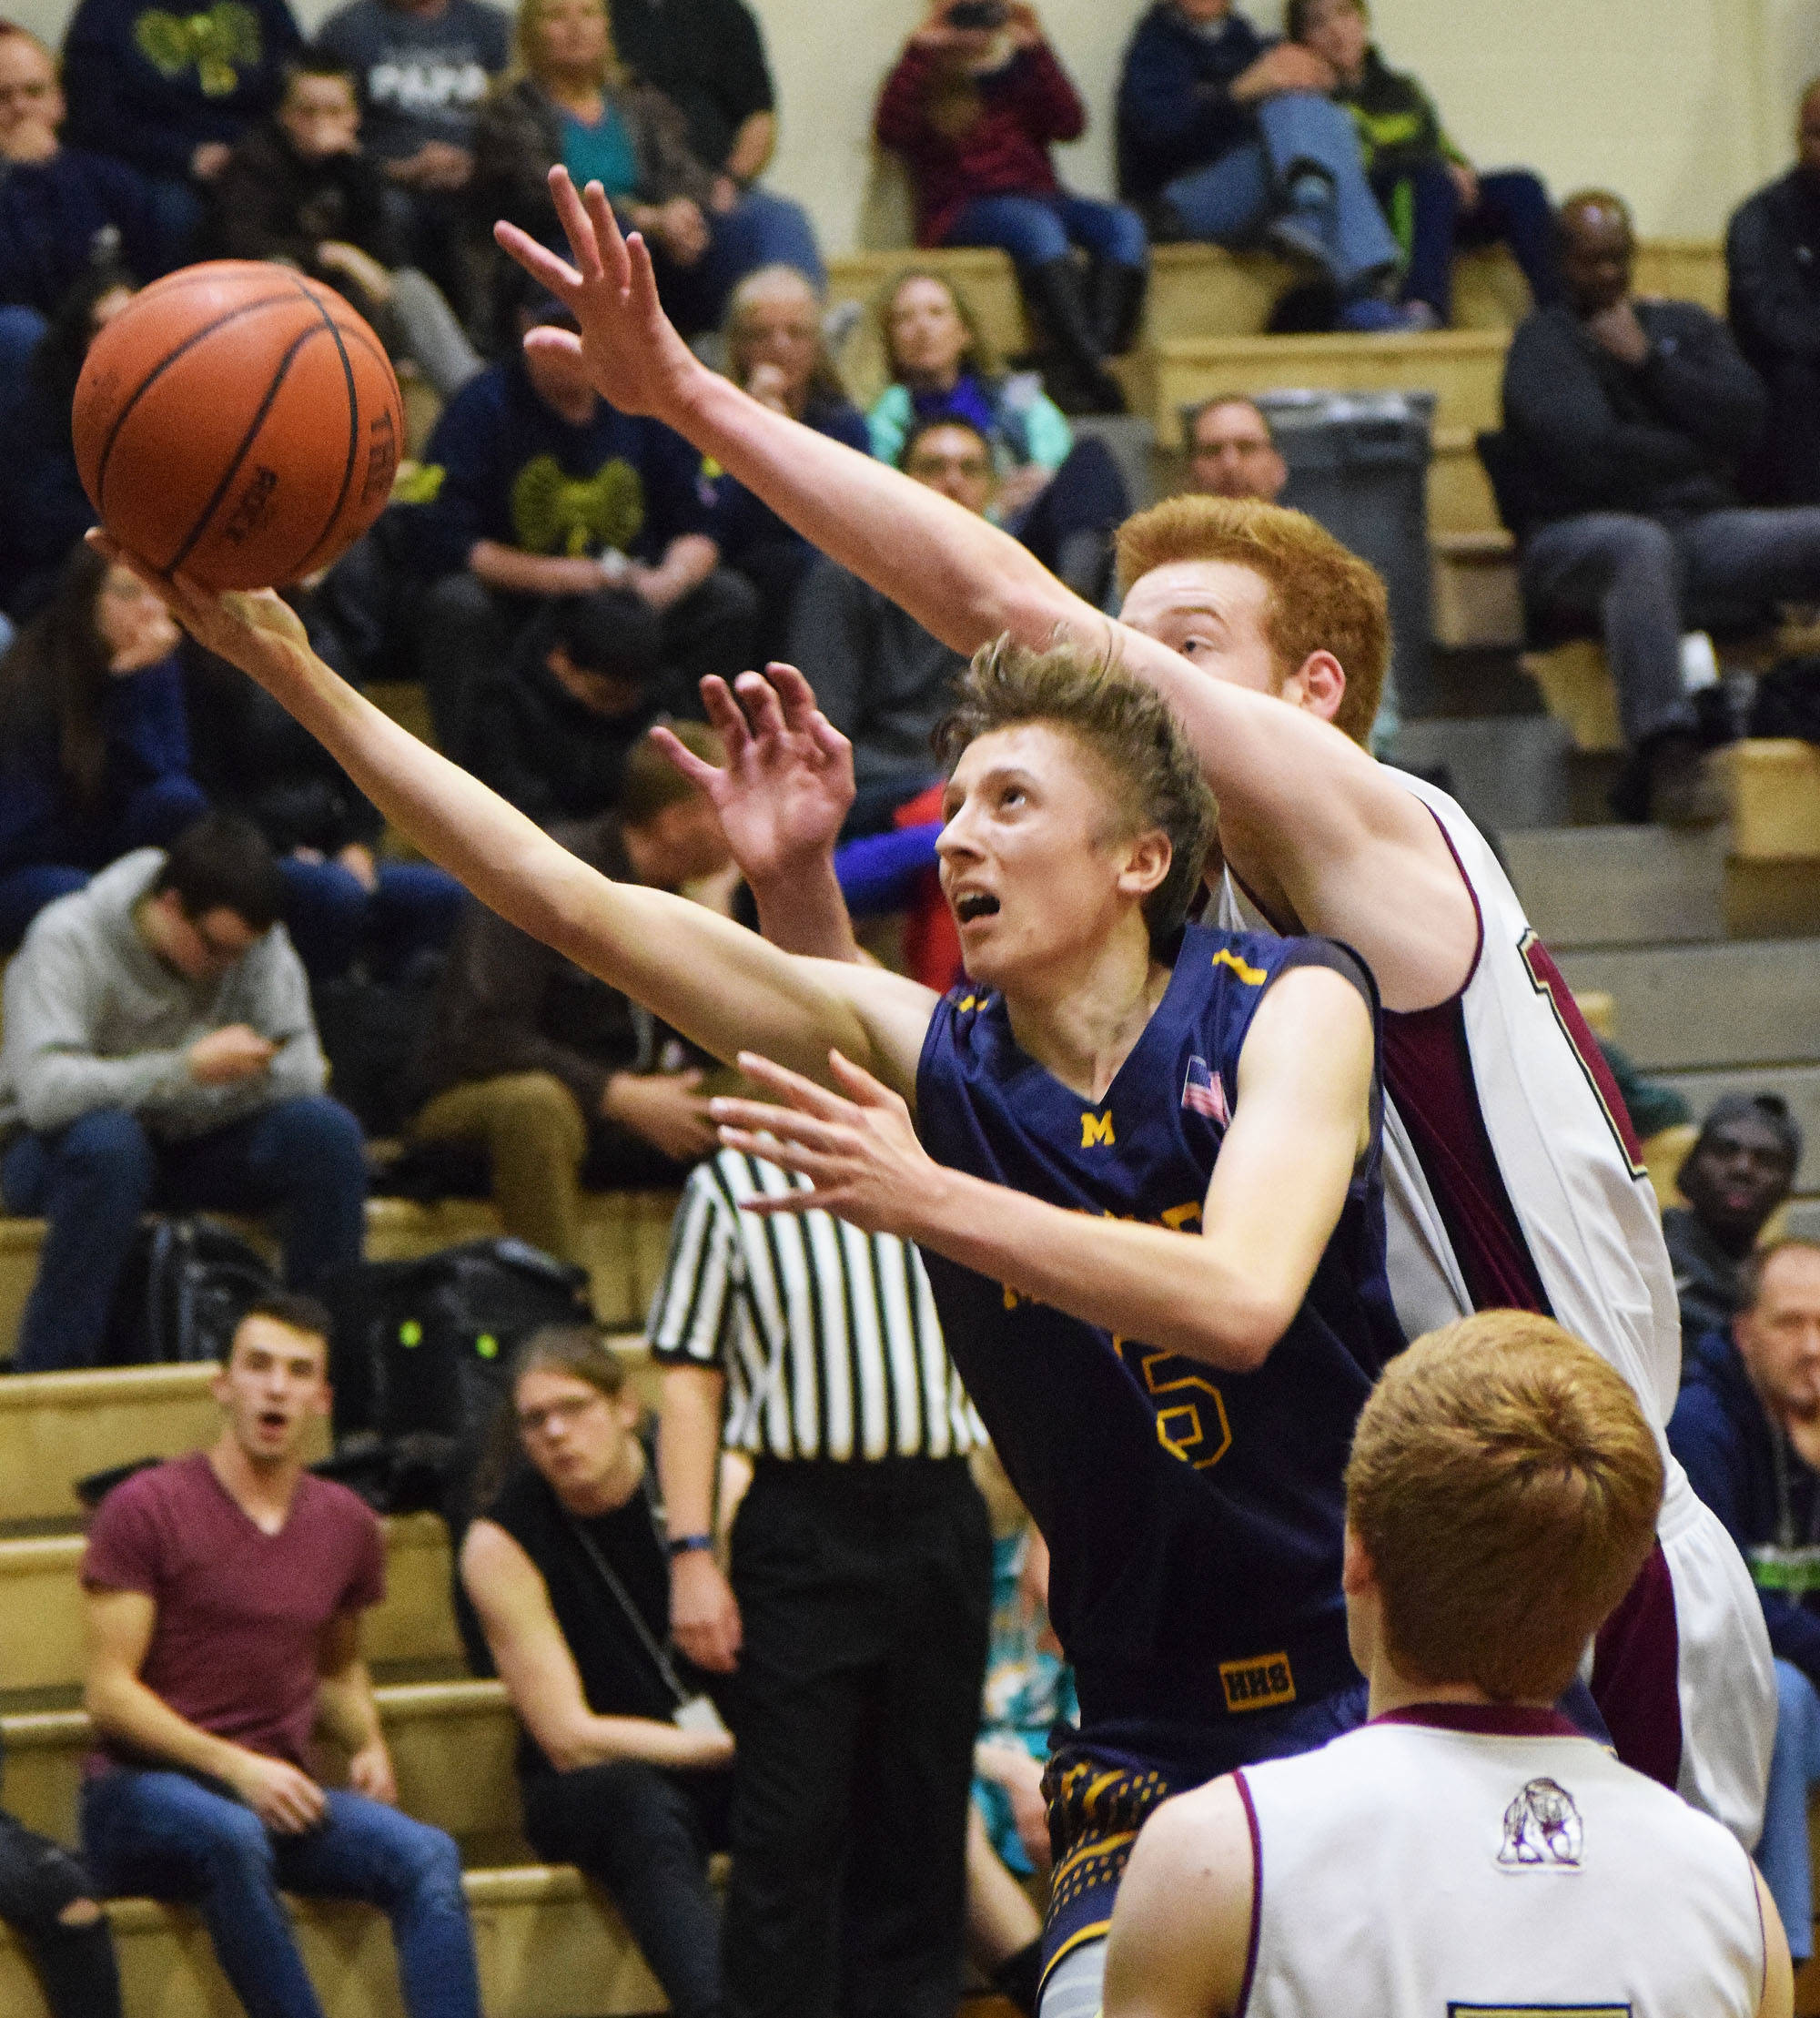 Homer’s Koby Etzwiler (5) reaches to score against Grace Christian’s Jimmy McGovern in a semifinal game Friday at the Southcentral Conference basketball tournament at Nikiski High School. (Photo by Joey Klecka/Peninsula Clarion)